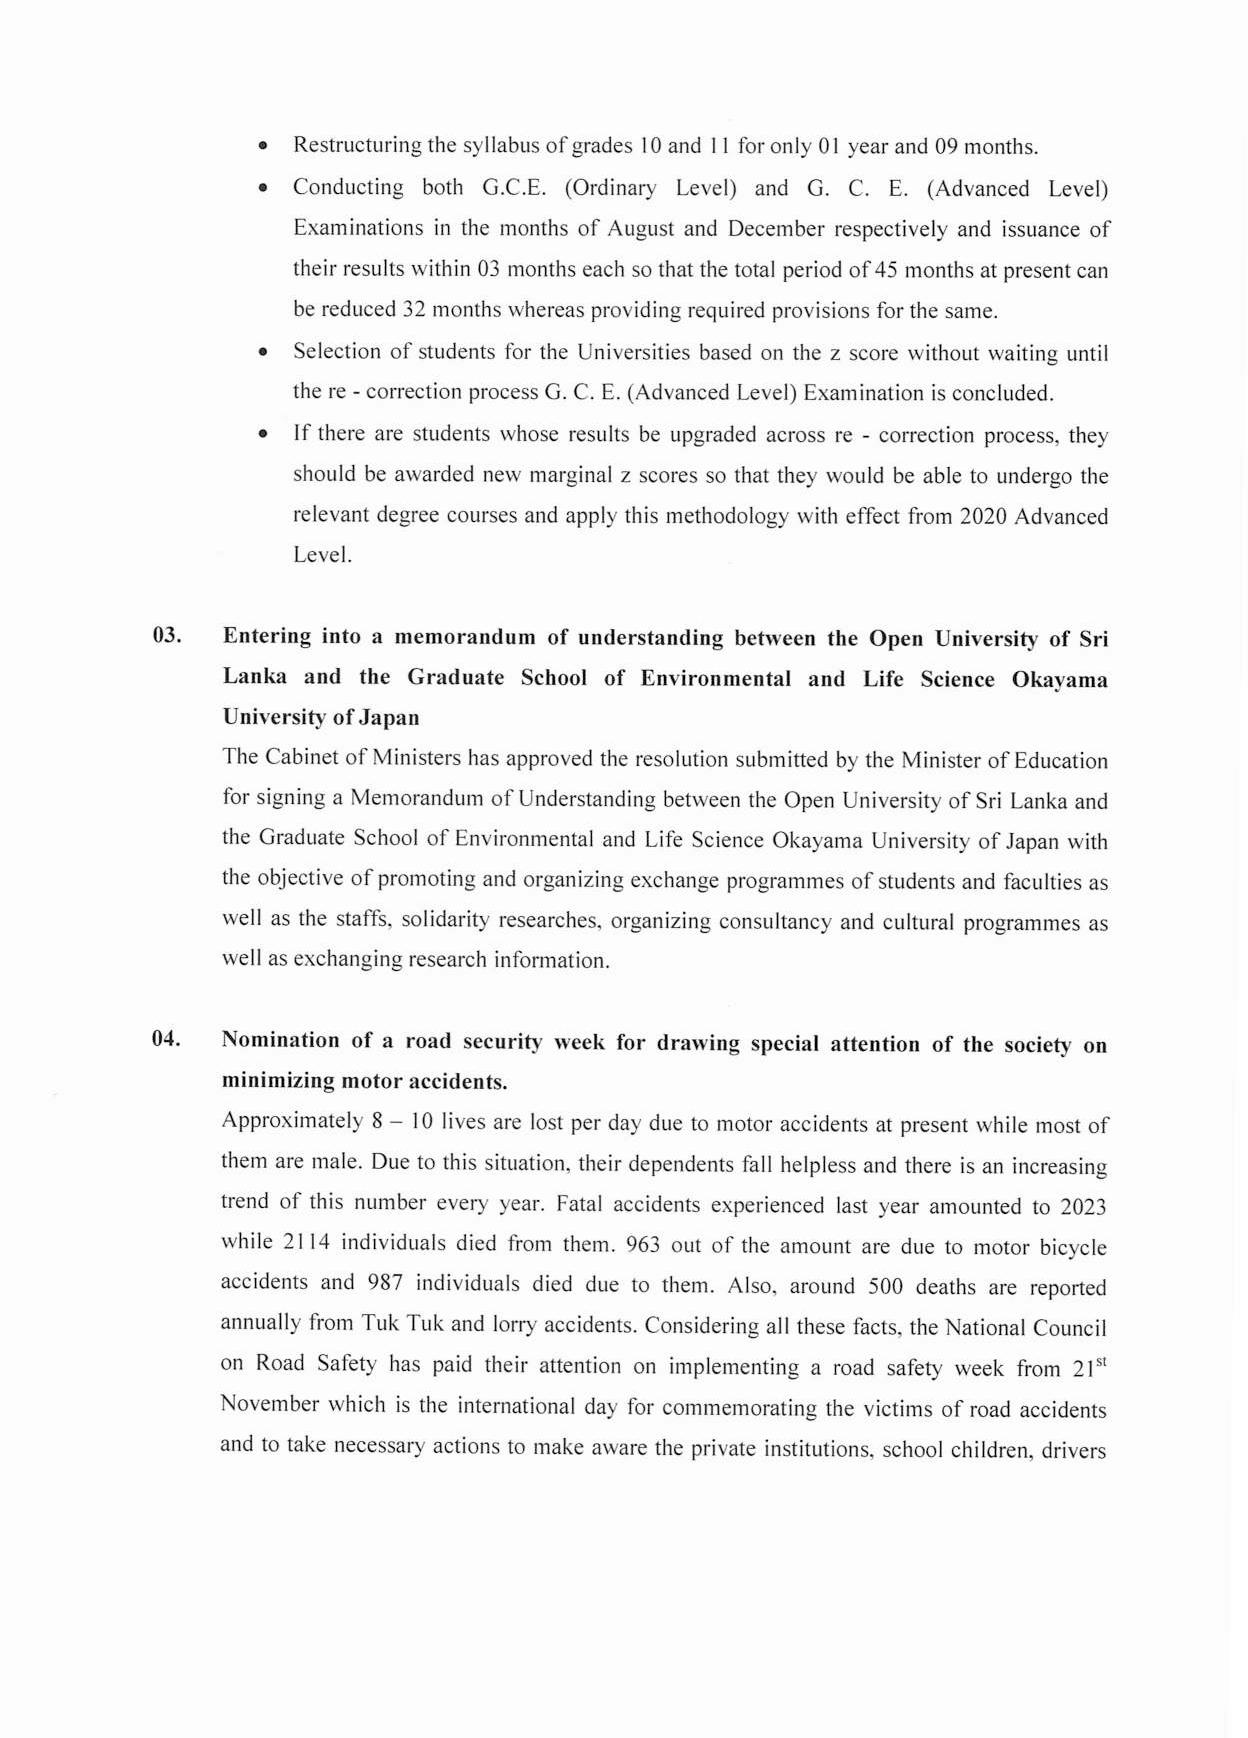 Cabinet Decision on 03.05.2021 English page 002